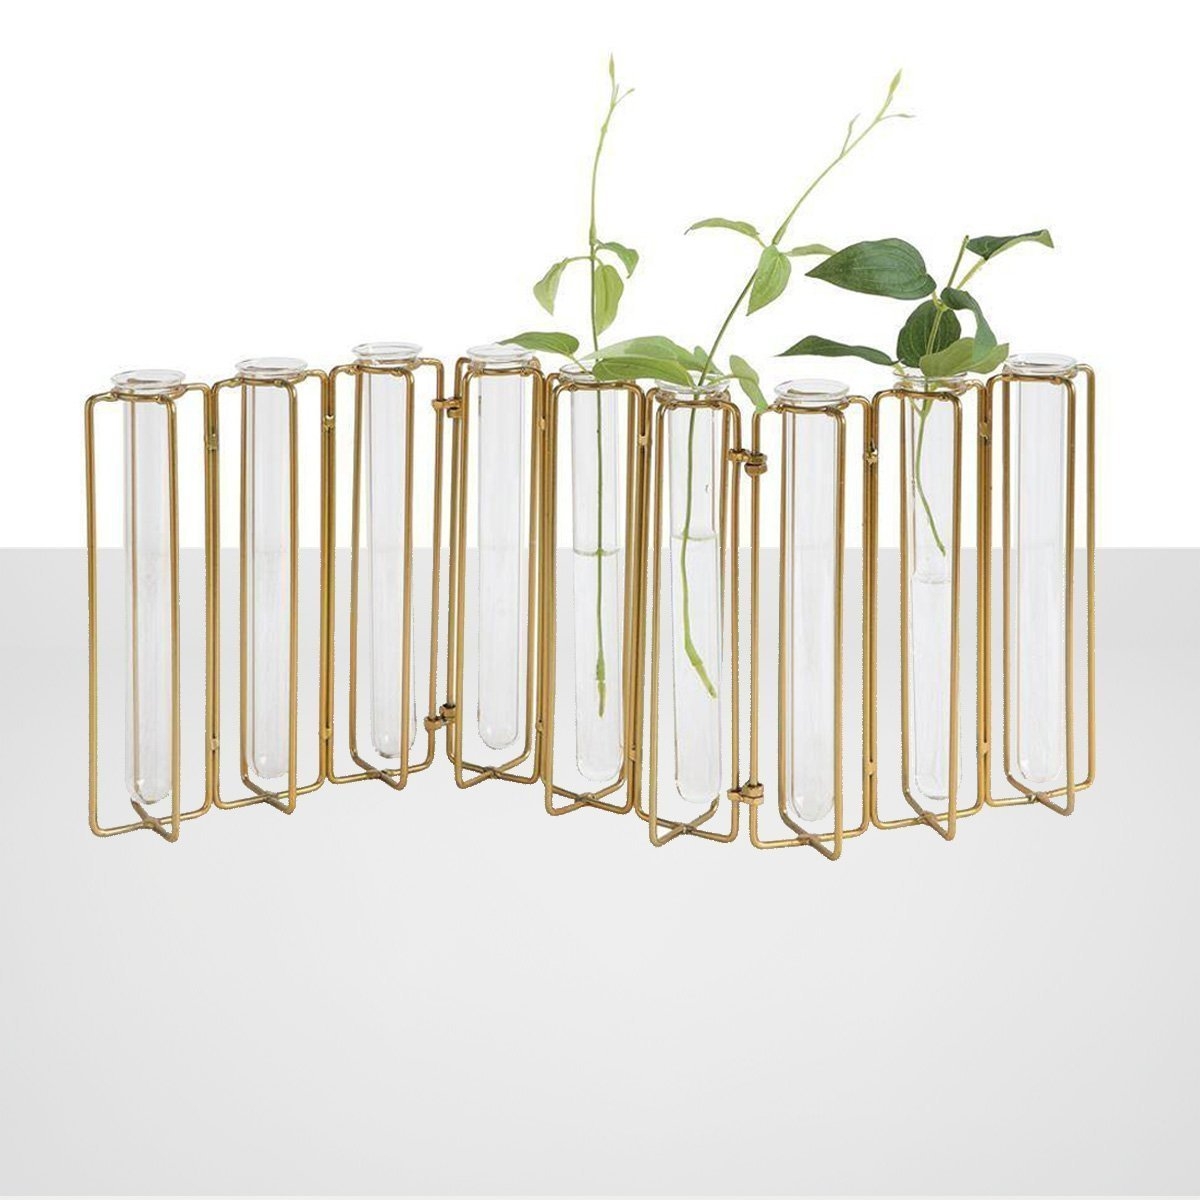 9 Test Tube Vases in a Single Gold Metal Stand - Image 1